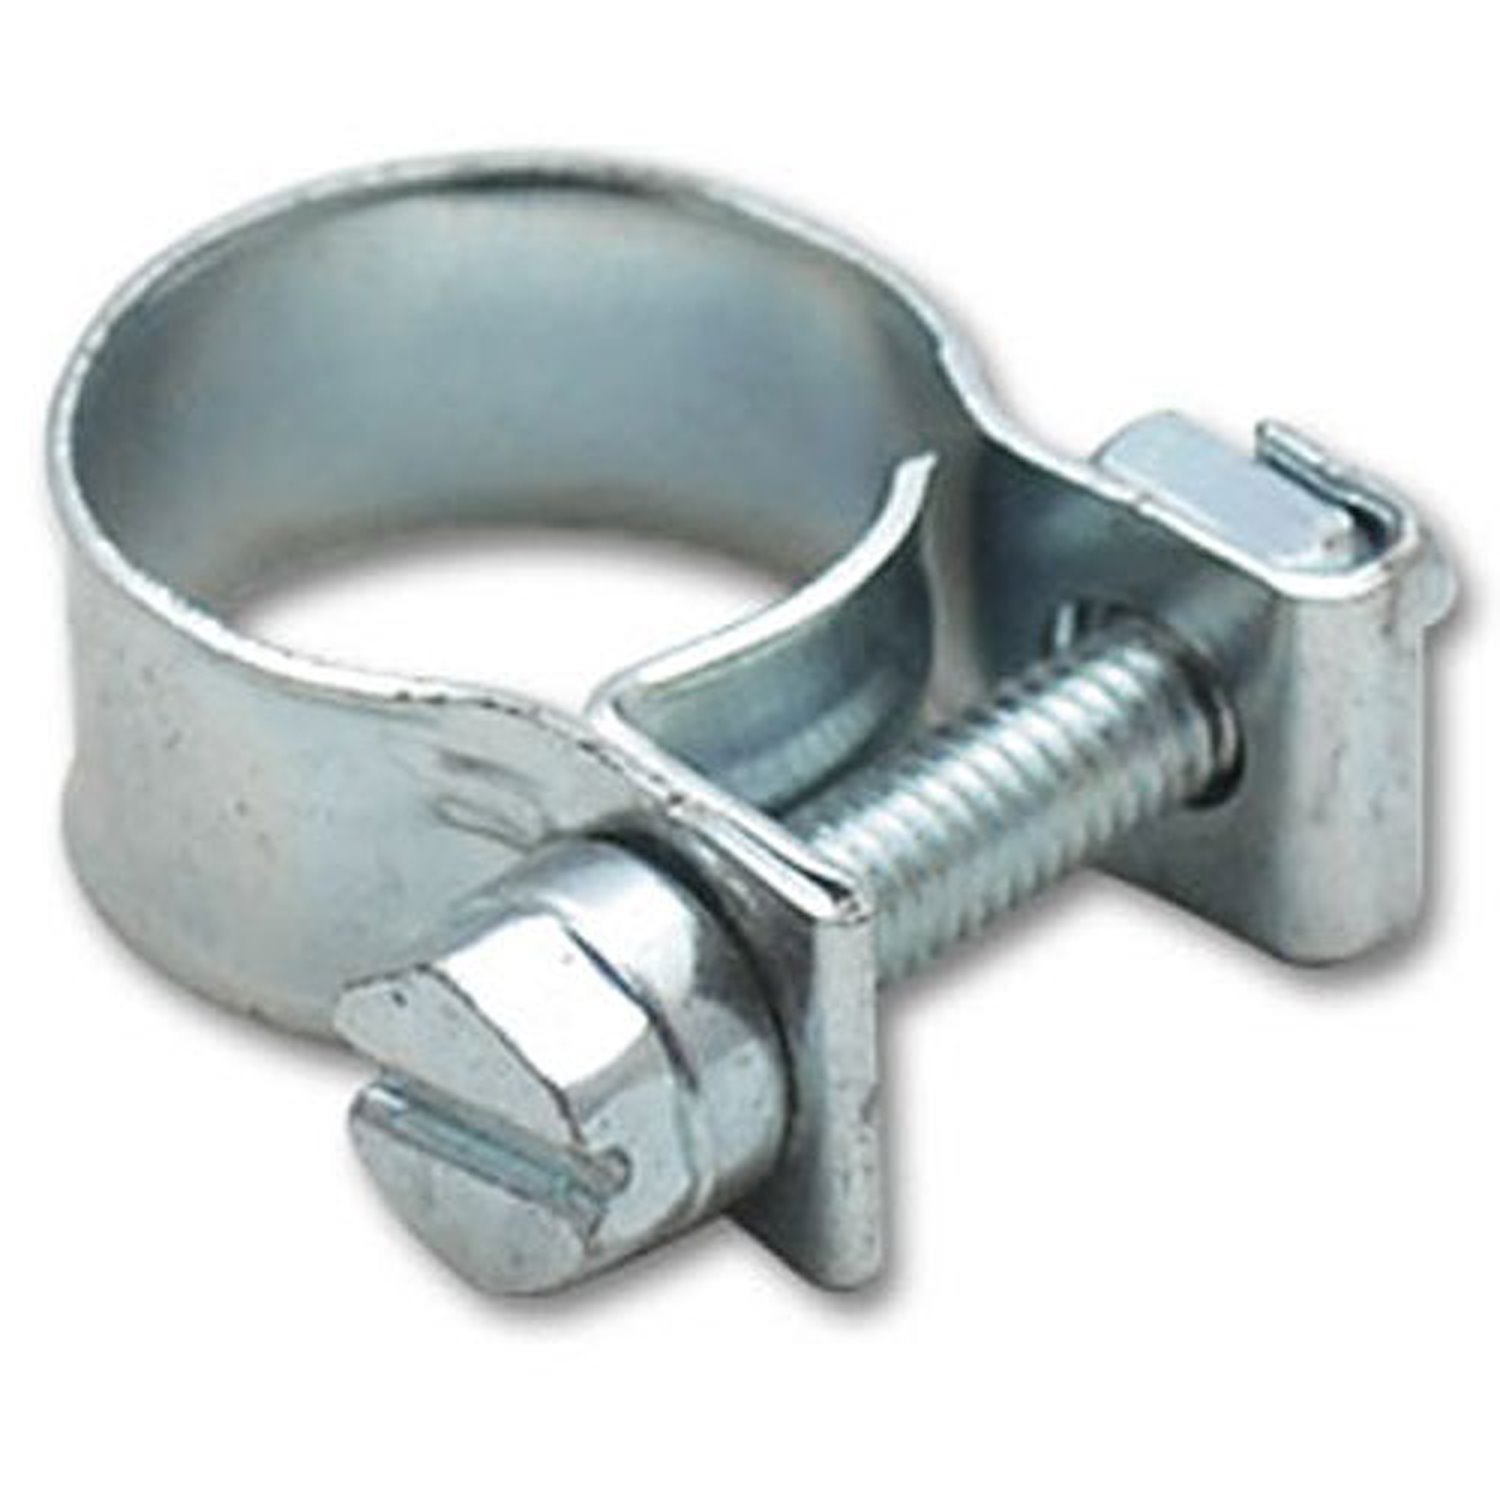 Fuel Injector Style Mini Hose Clamps 9mm - 11mm